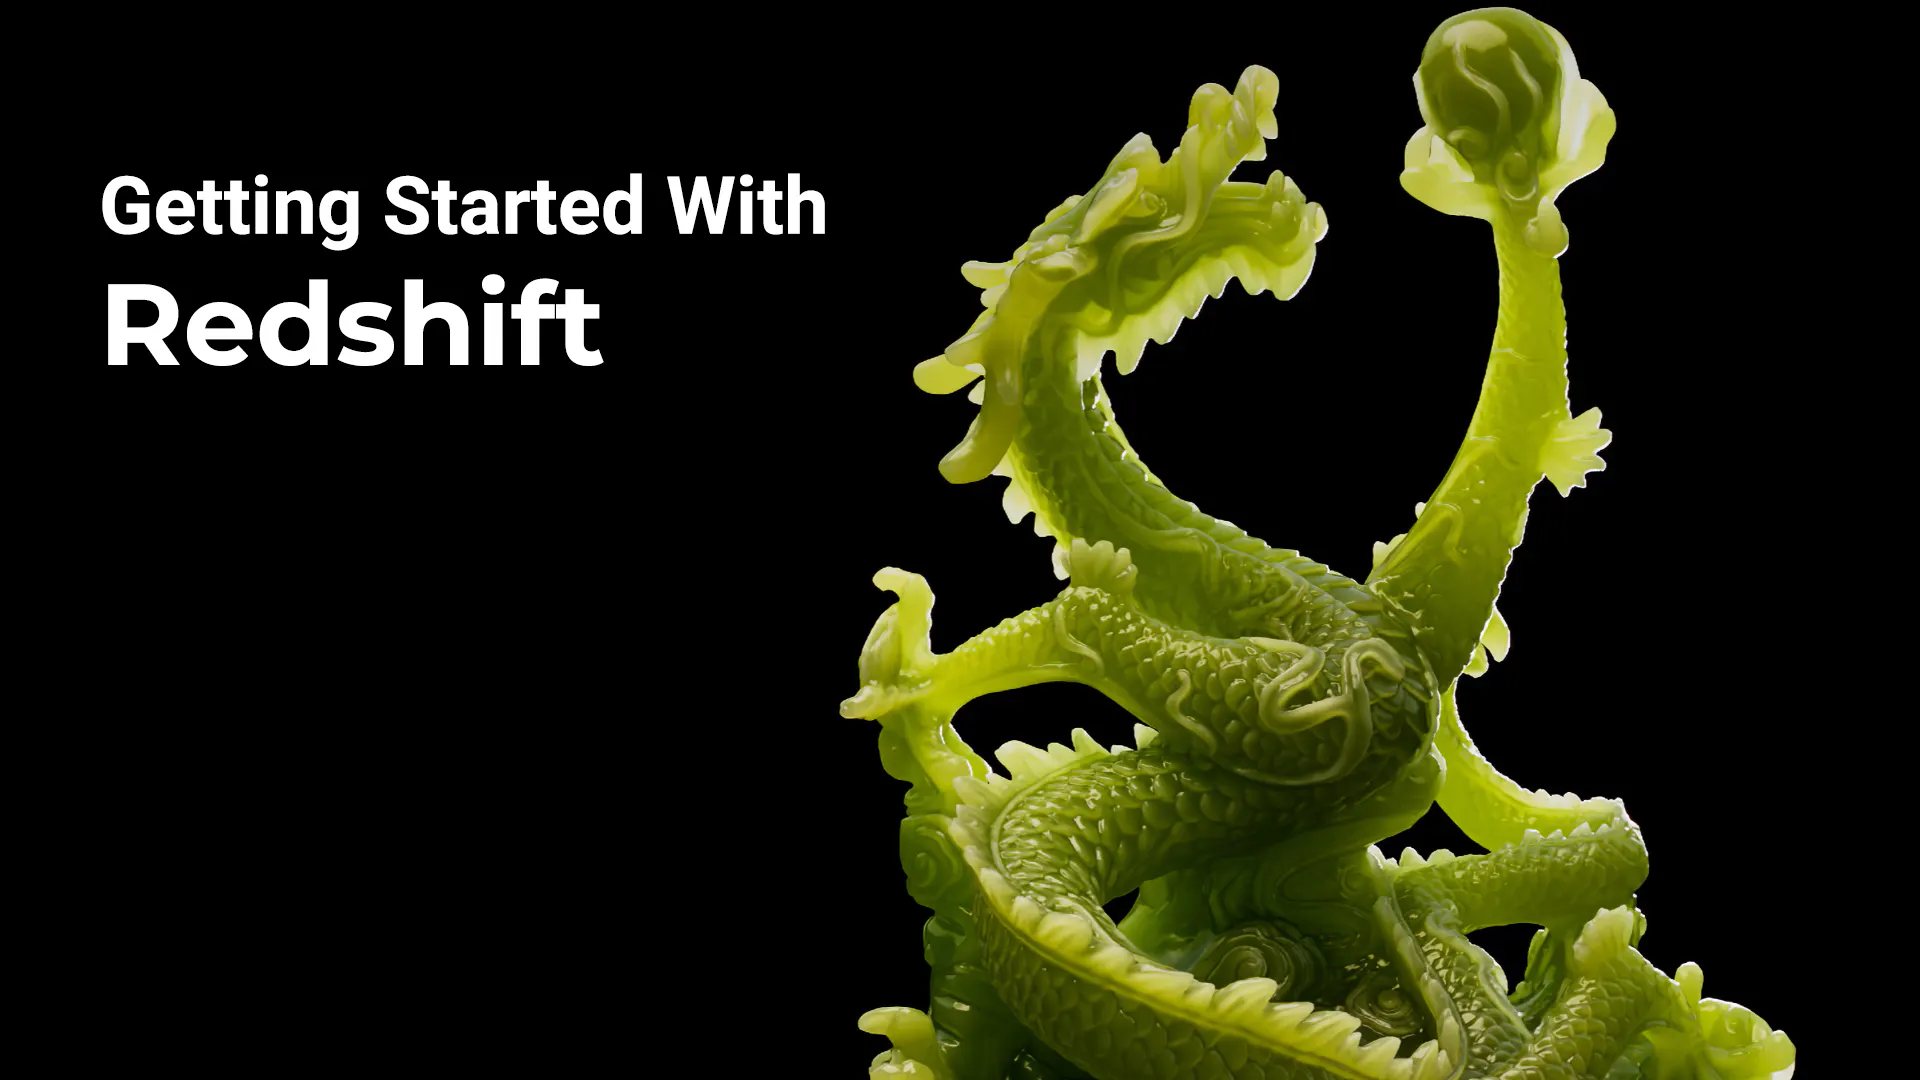 Getting Started with Redshift